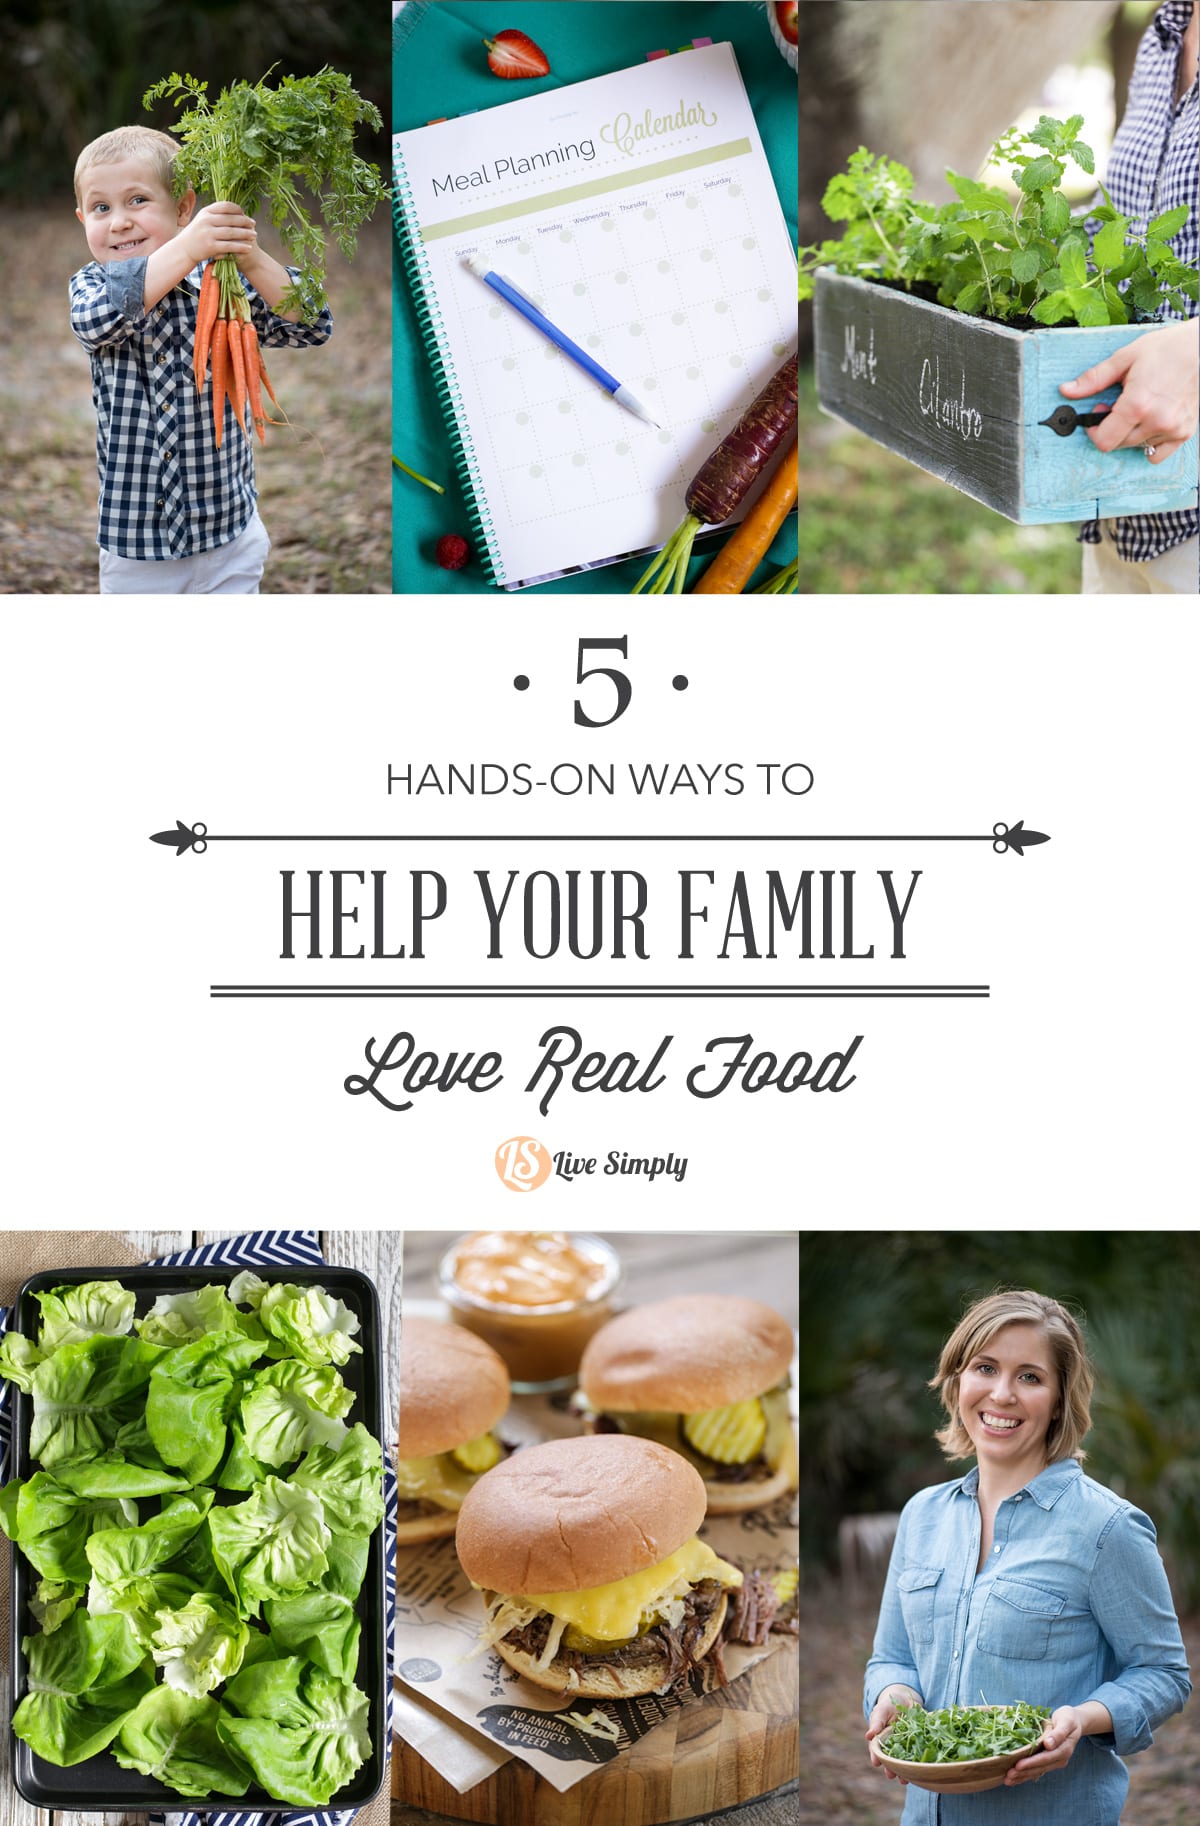 5 Hands-On Ways to Help Your Family Love Real Food